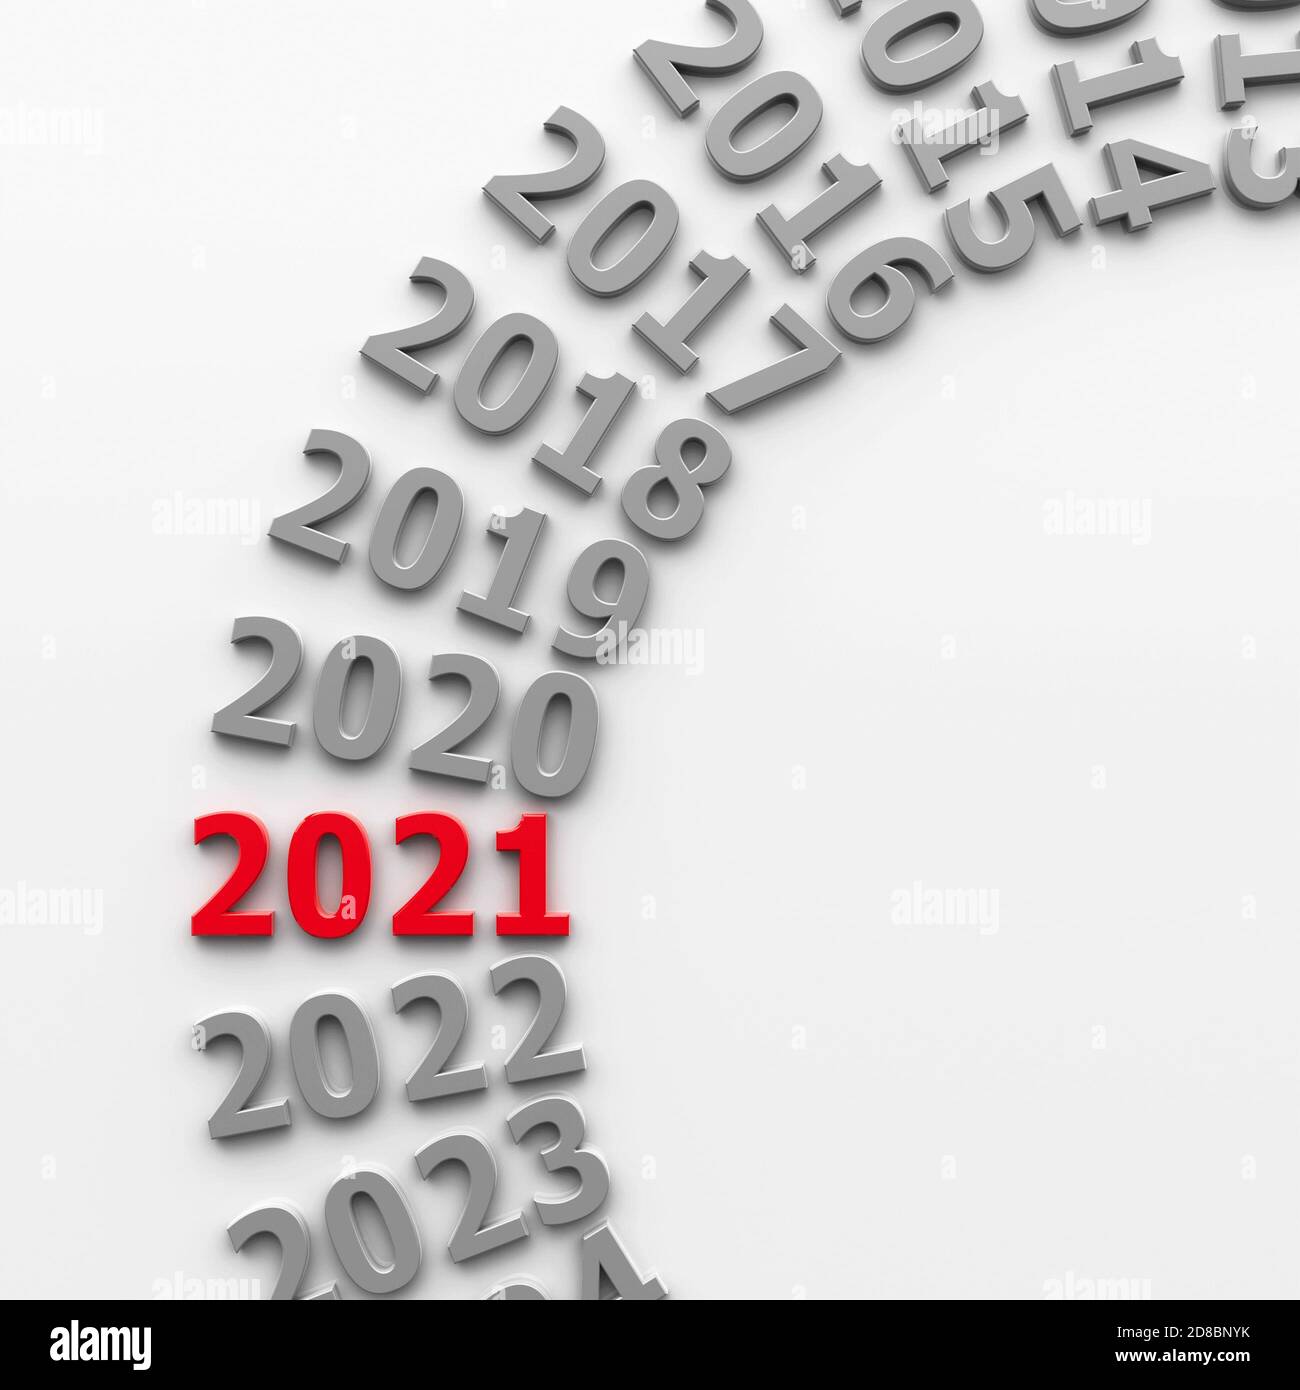 2021 past in the circle represents the new year 2021, three-dimensional rendering, 3D illustration Stock Photo